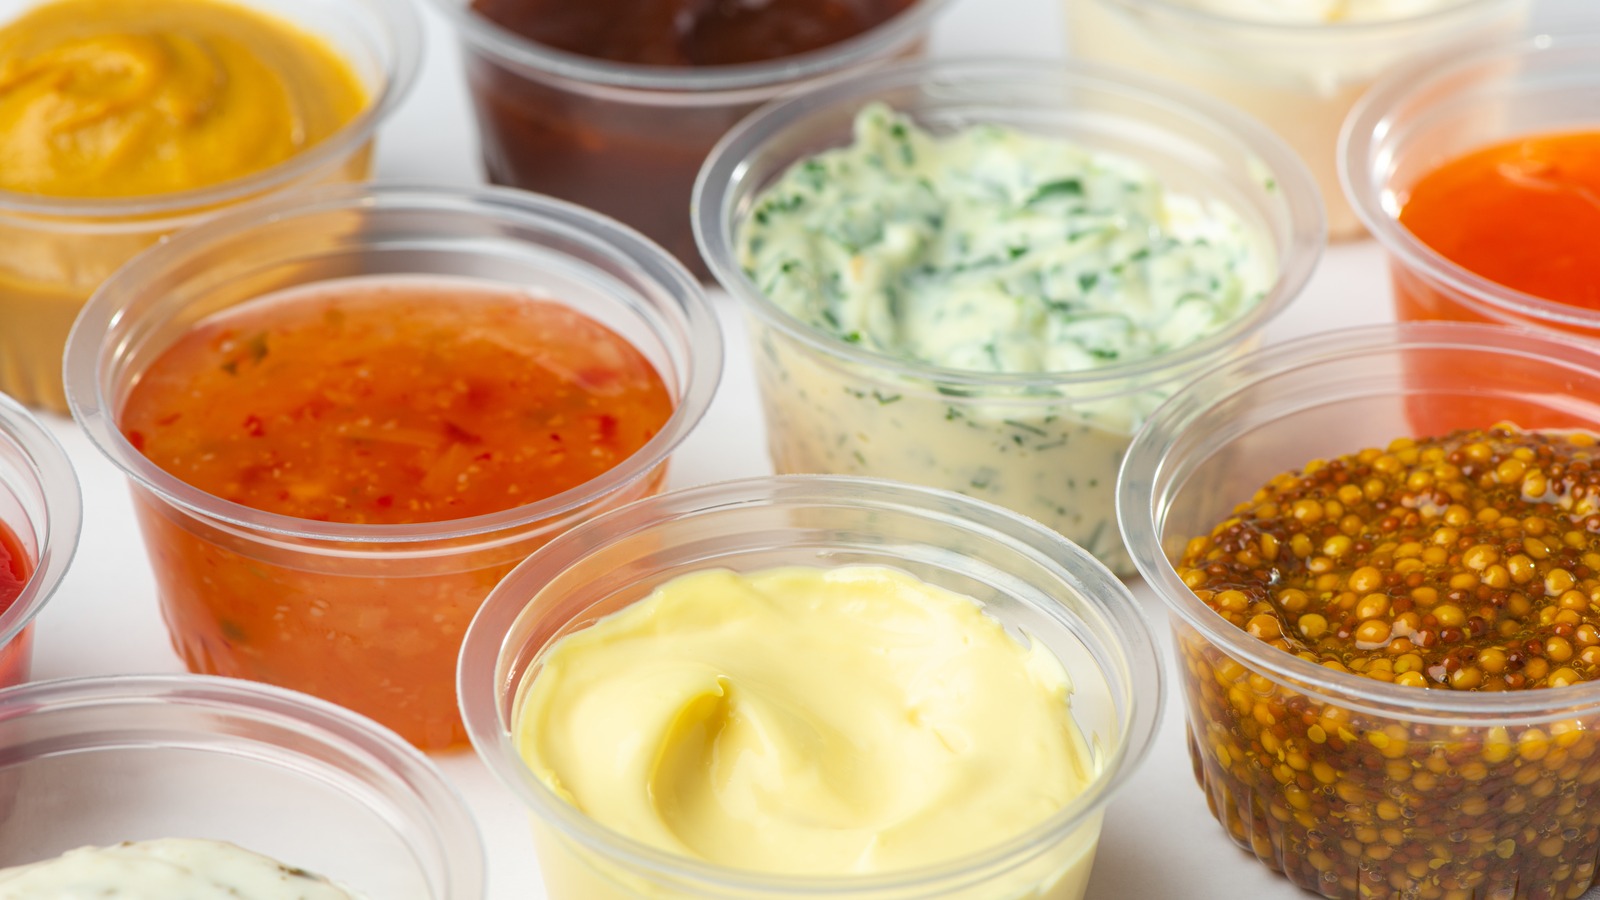 6 Best And 5 Worst Restaurant Sauces You Can Find At The Grocery Store - Mashed